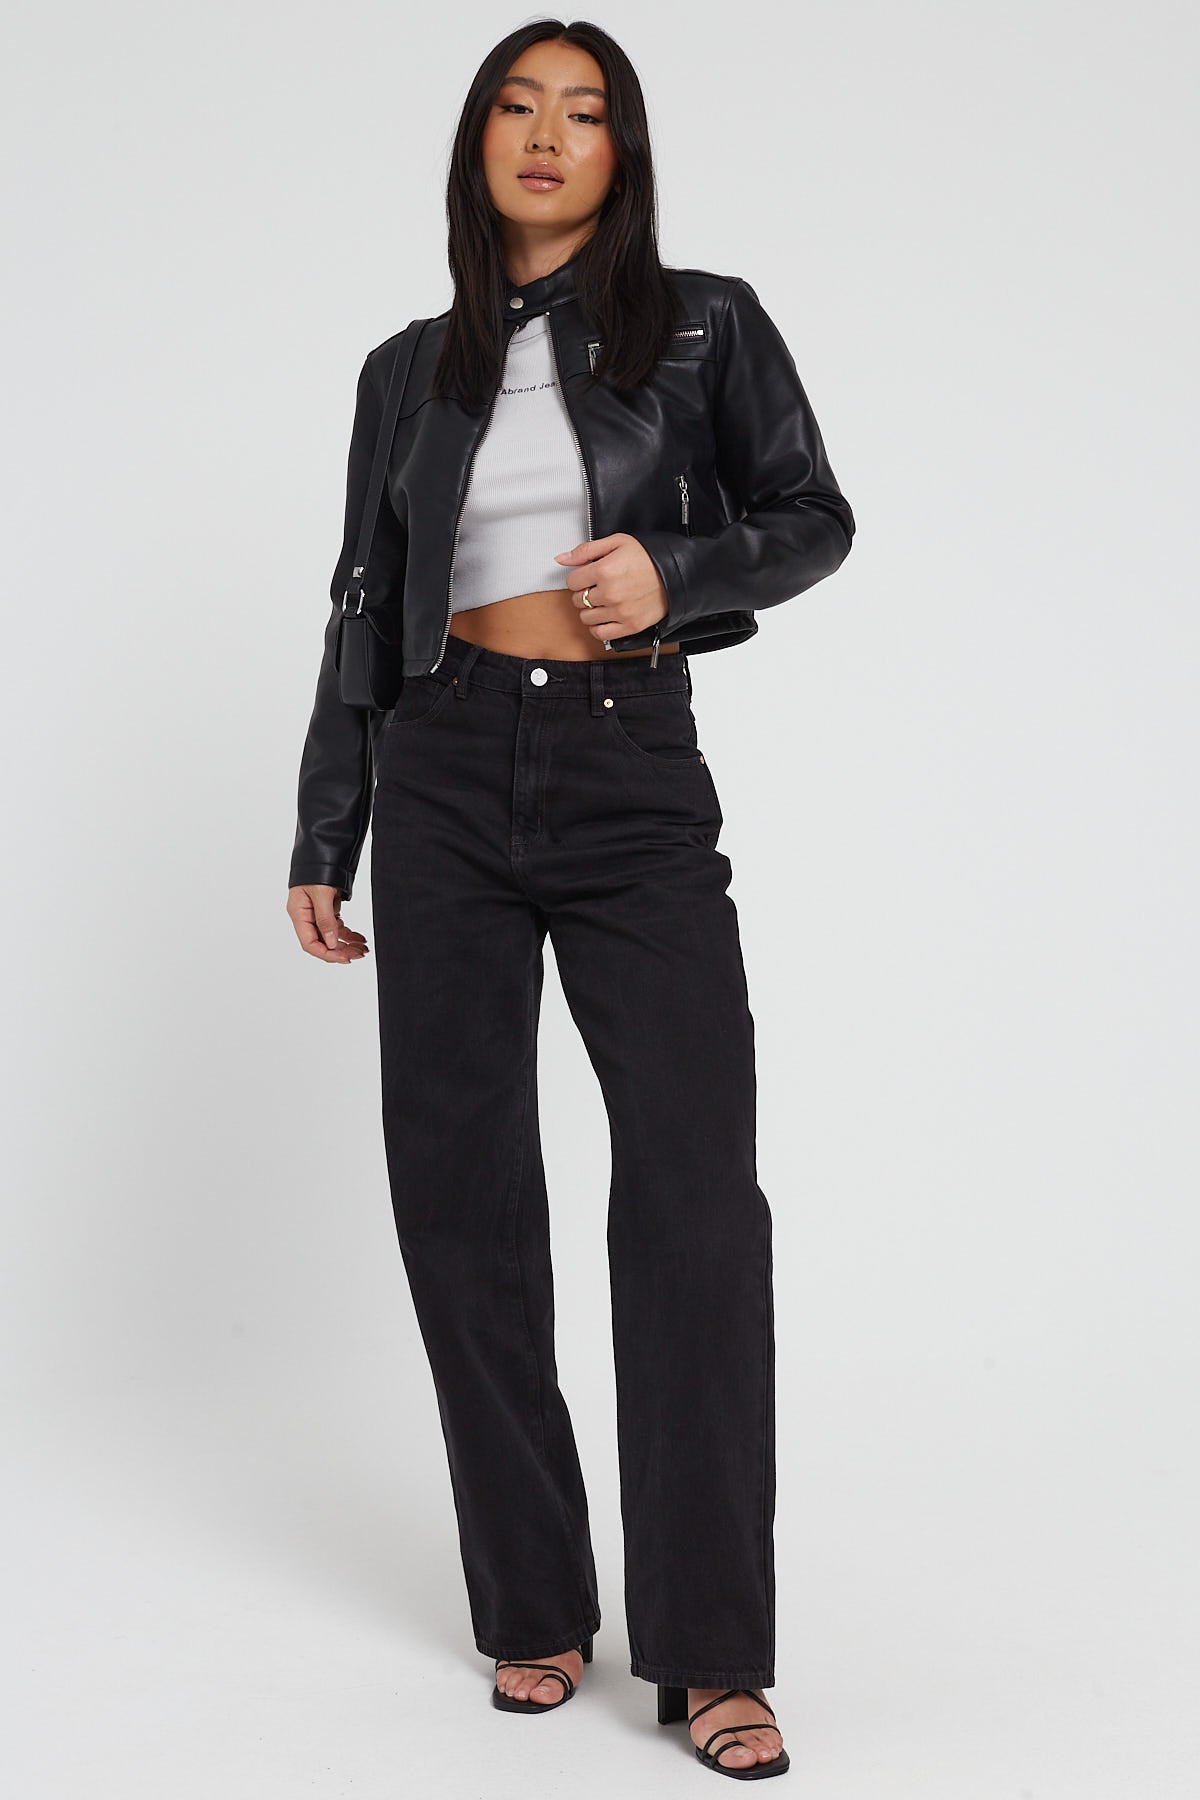 Abrand A Carrie Jean 90s Black